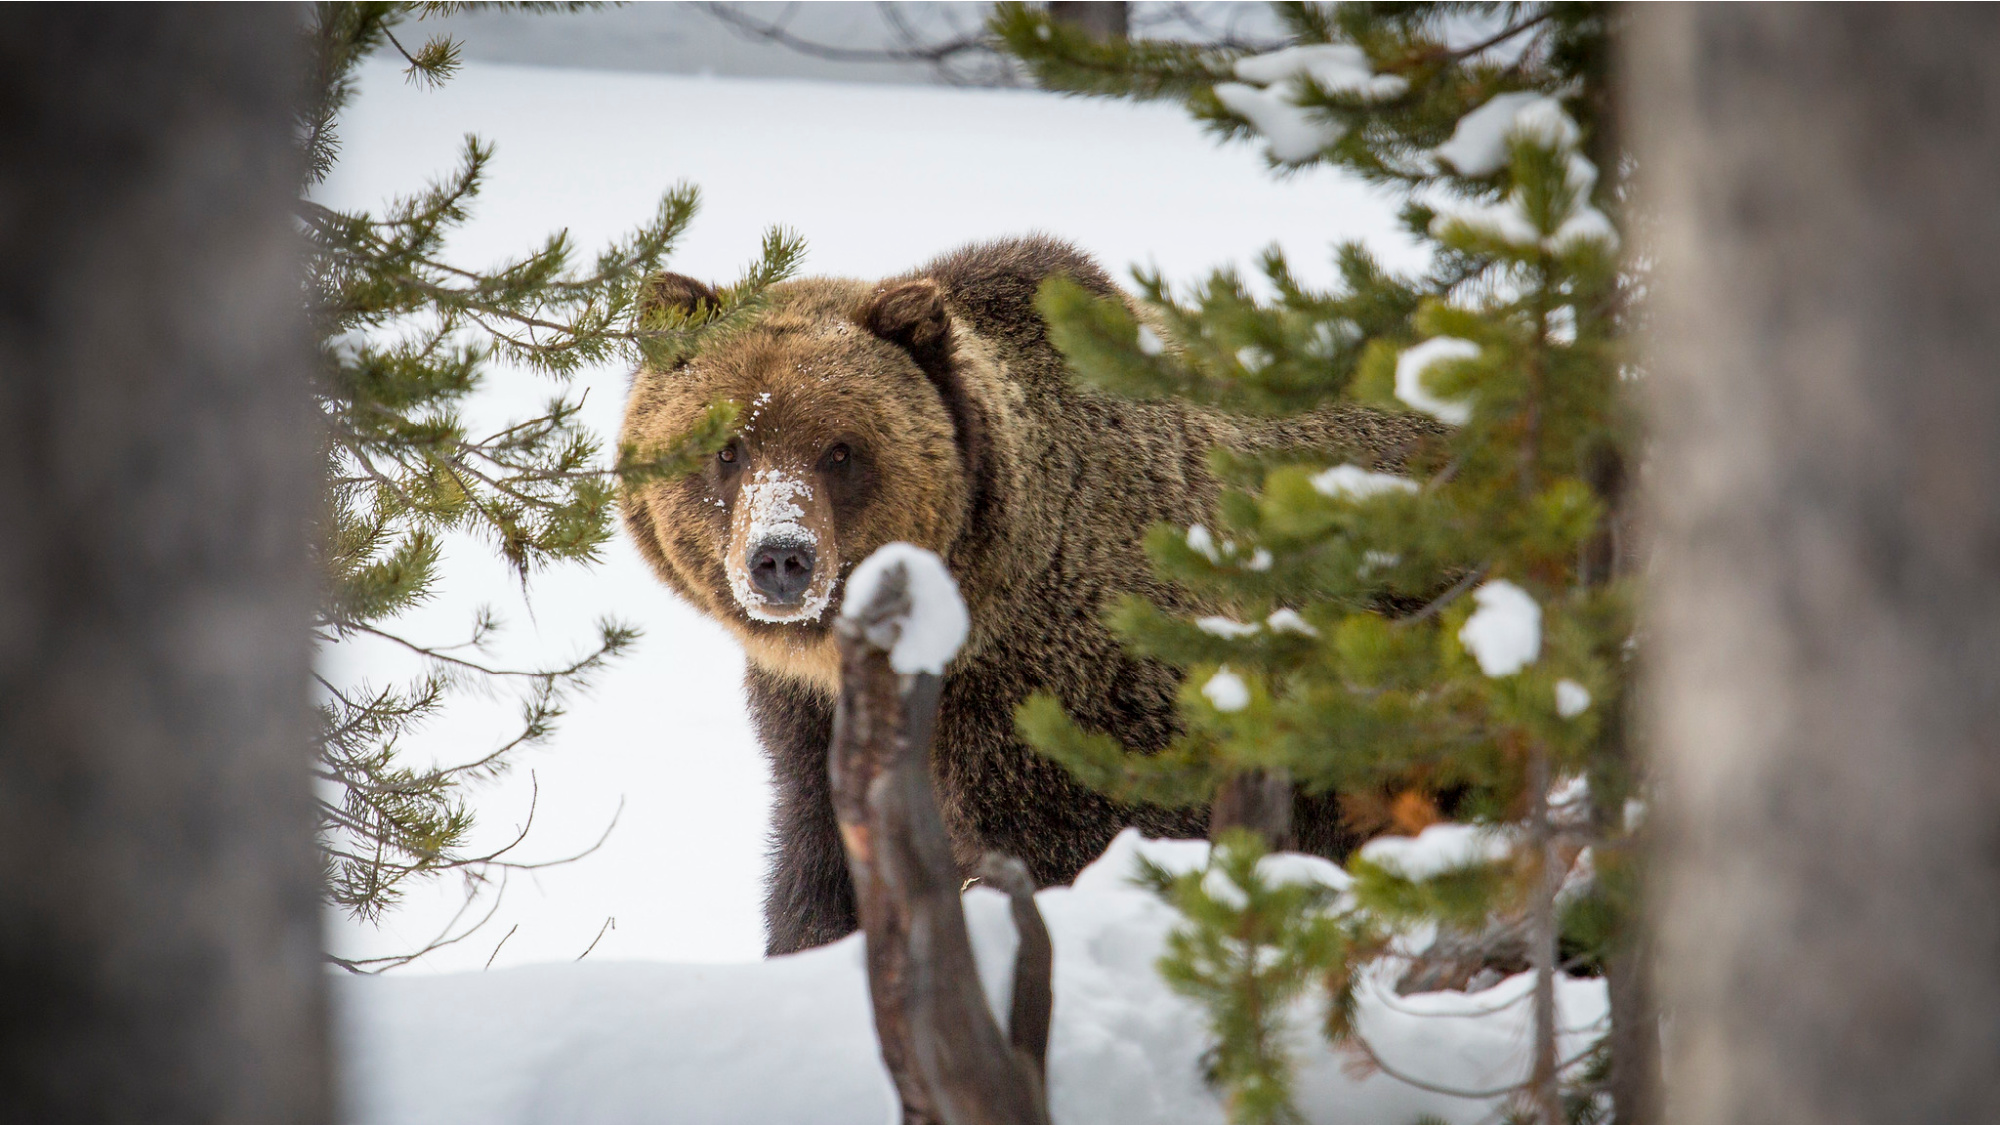 A grizzly bear walks through a snowy forest in Yellowstone National Park.